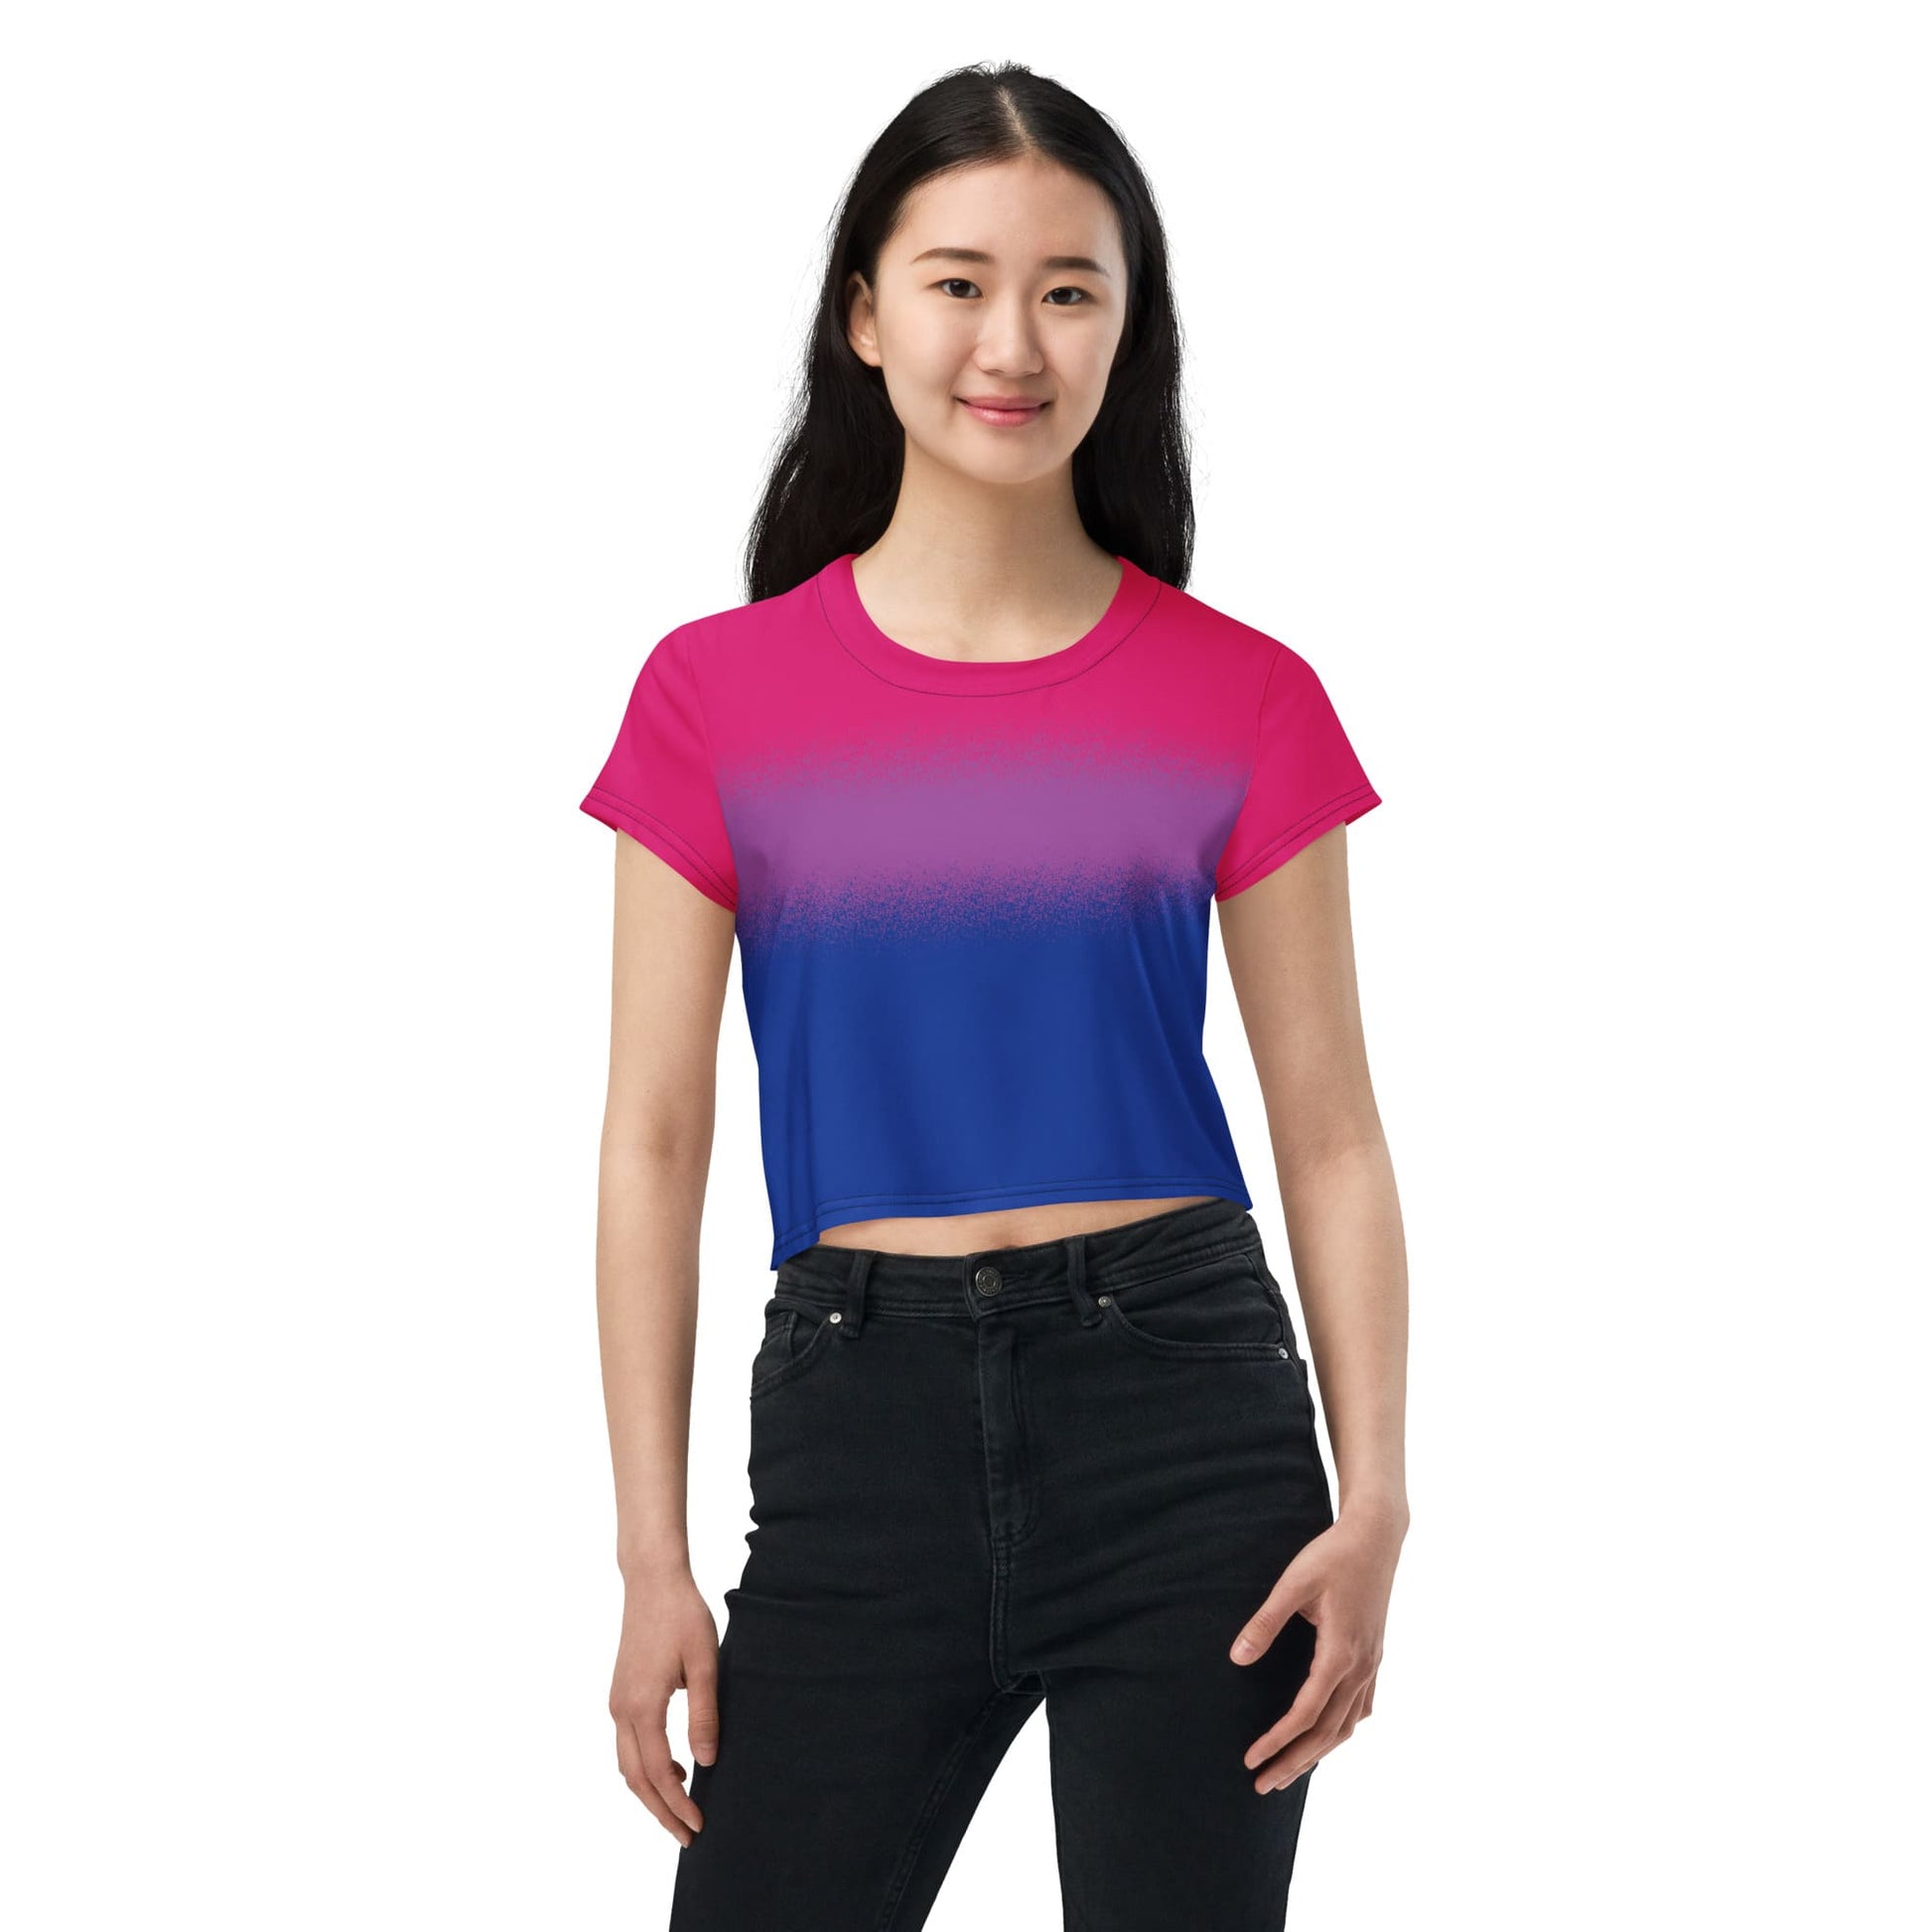 bisexual crop top, bi pride cropped shirt with wings on back, front